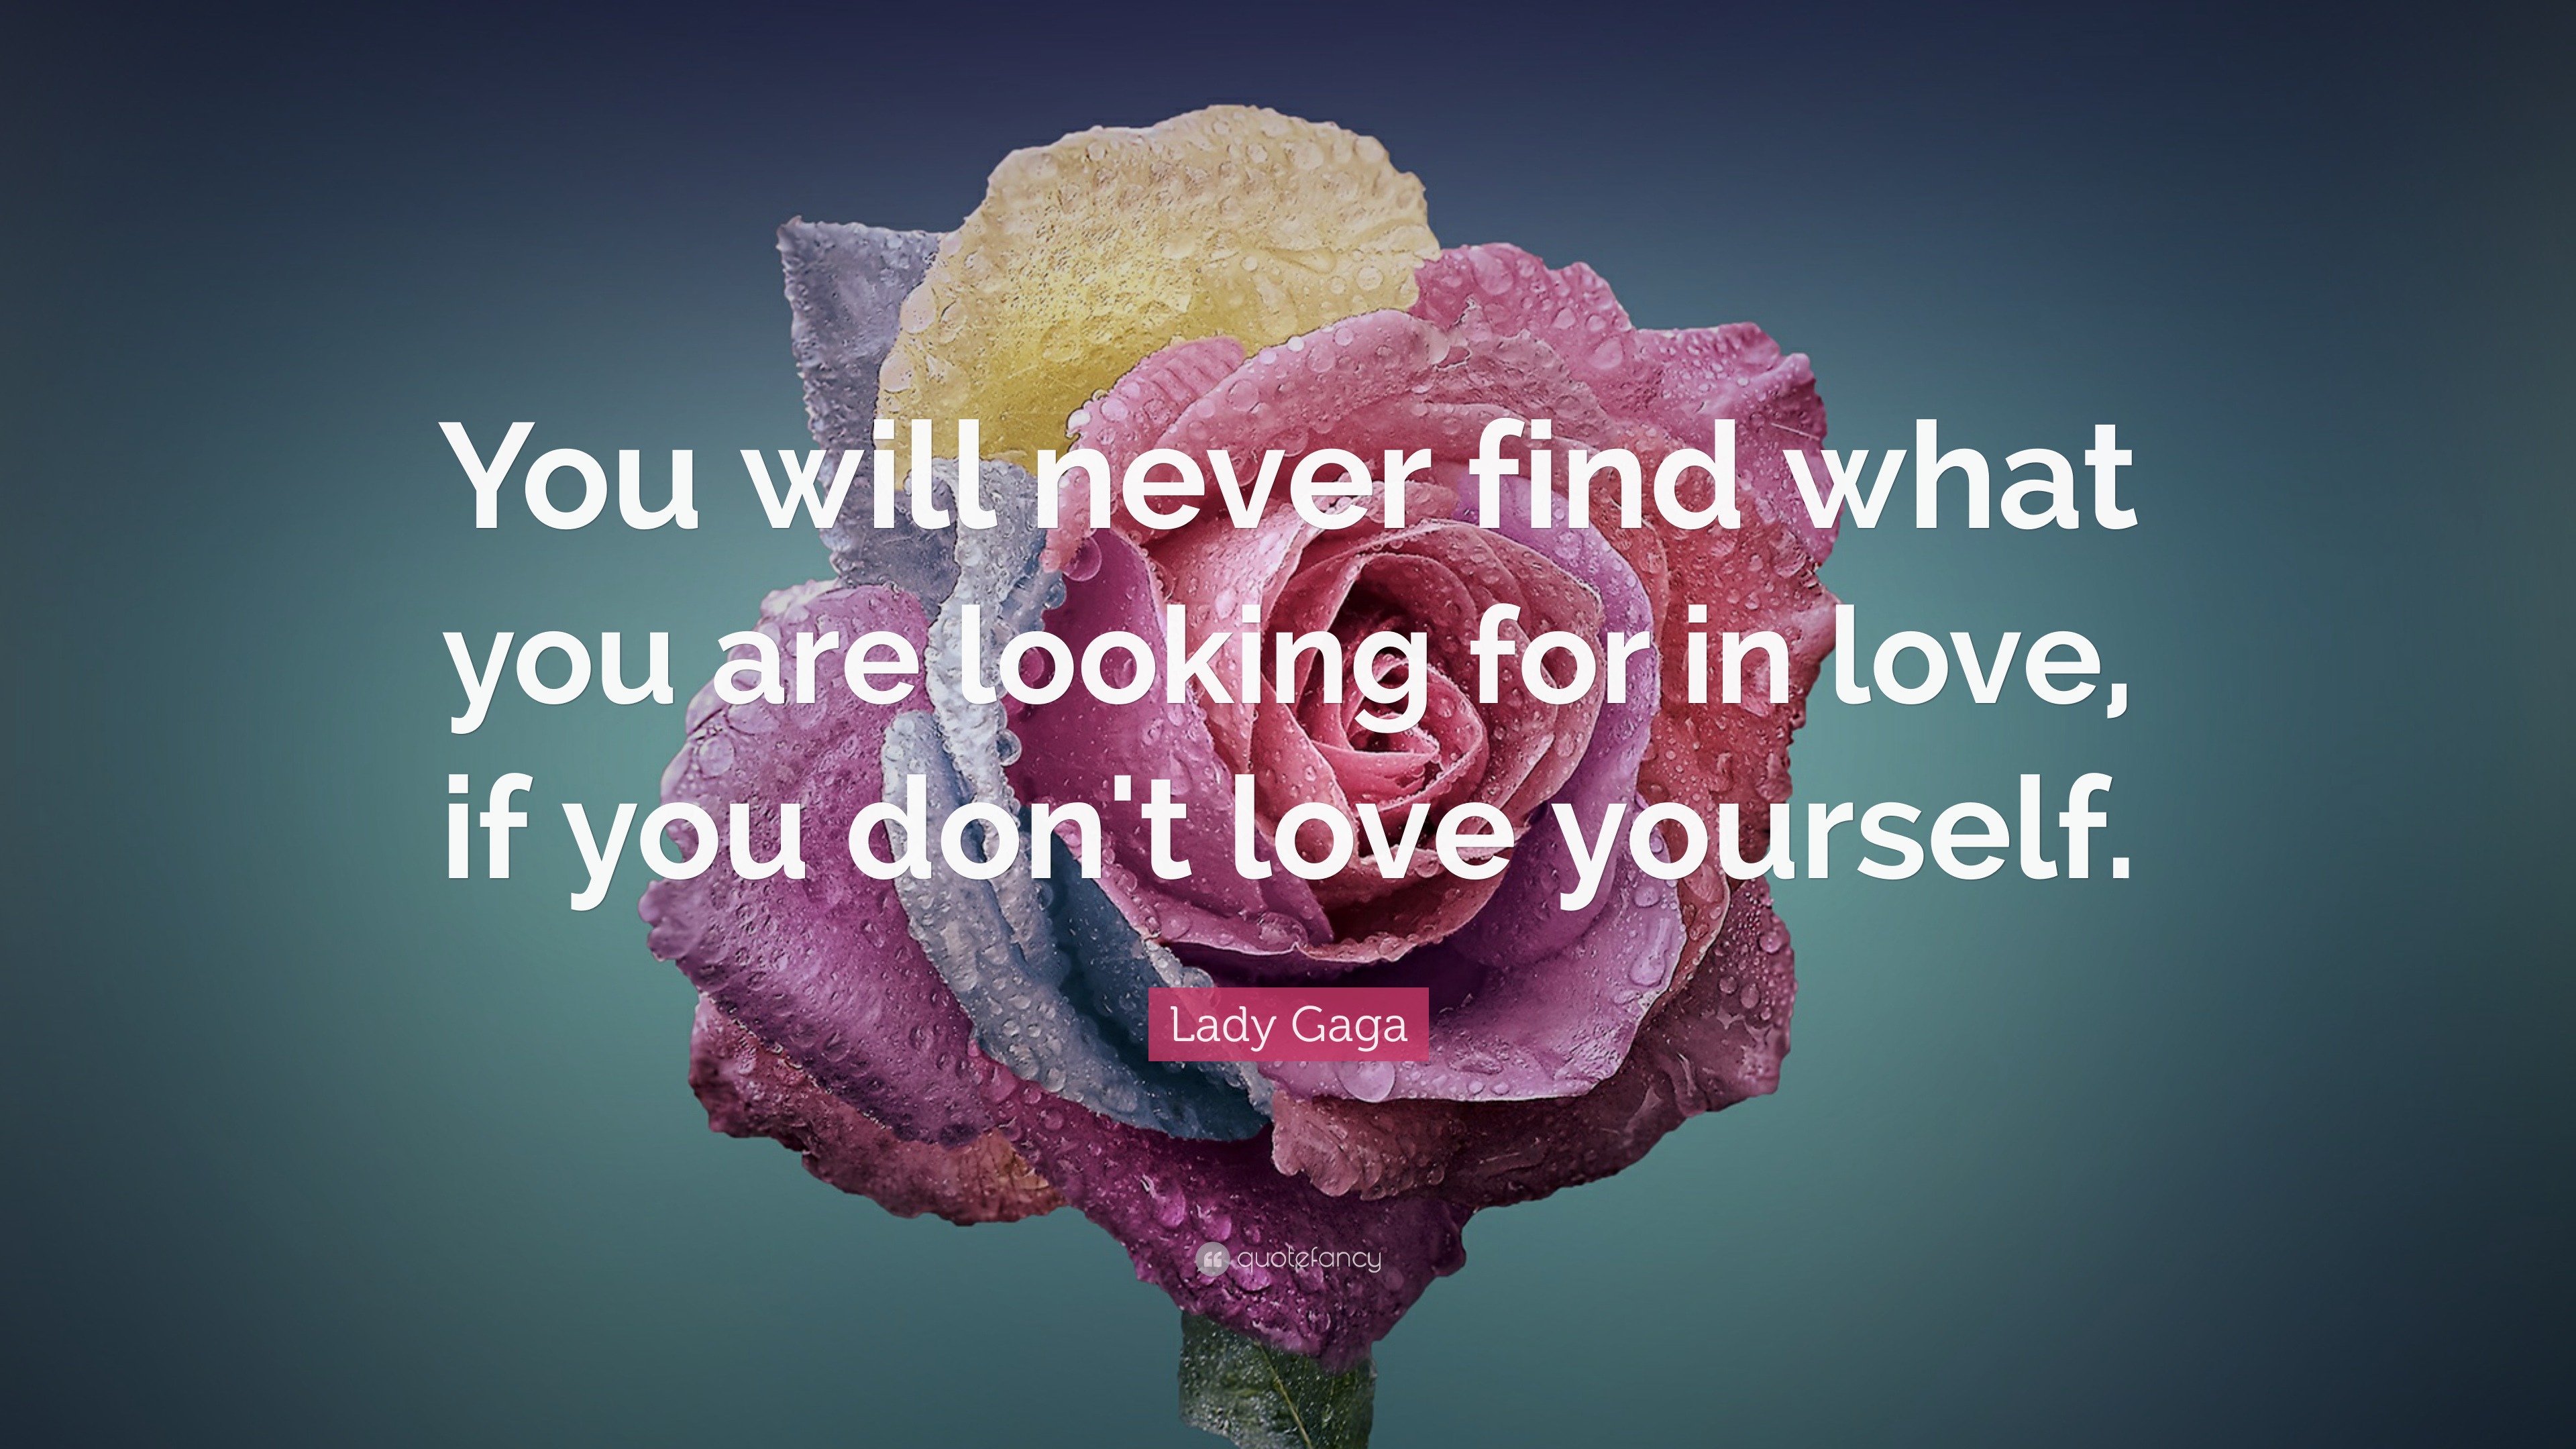 Lady Gaga Quote: “You will never find what you are looking for in love ...